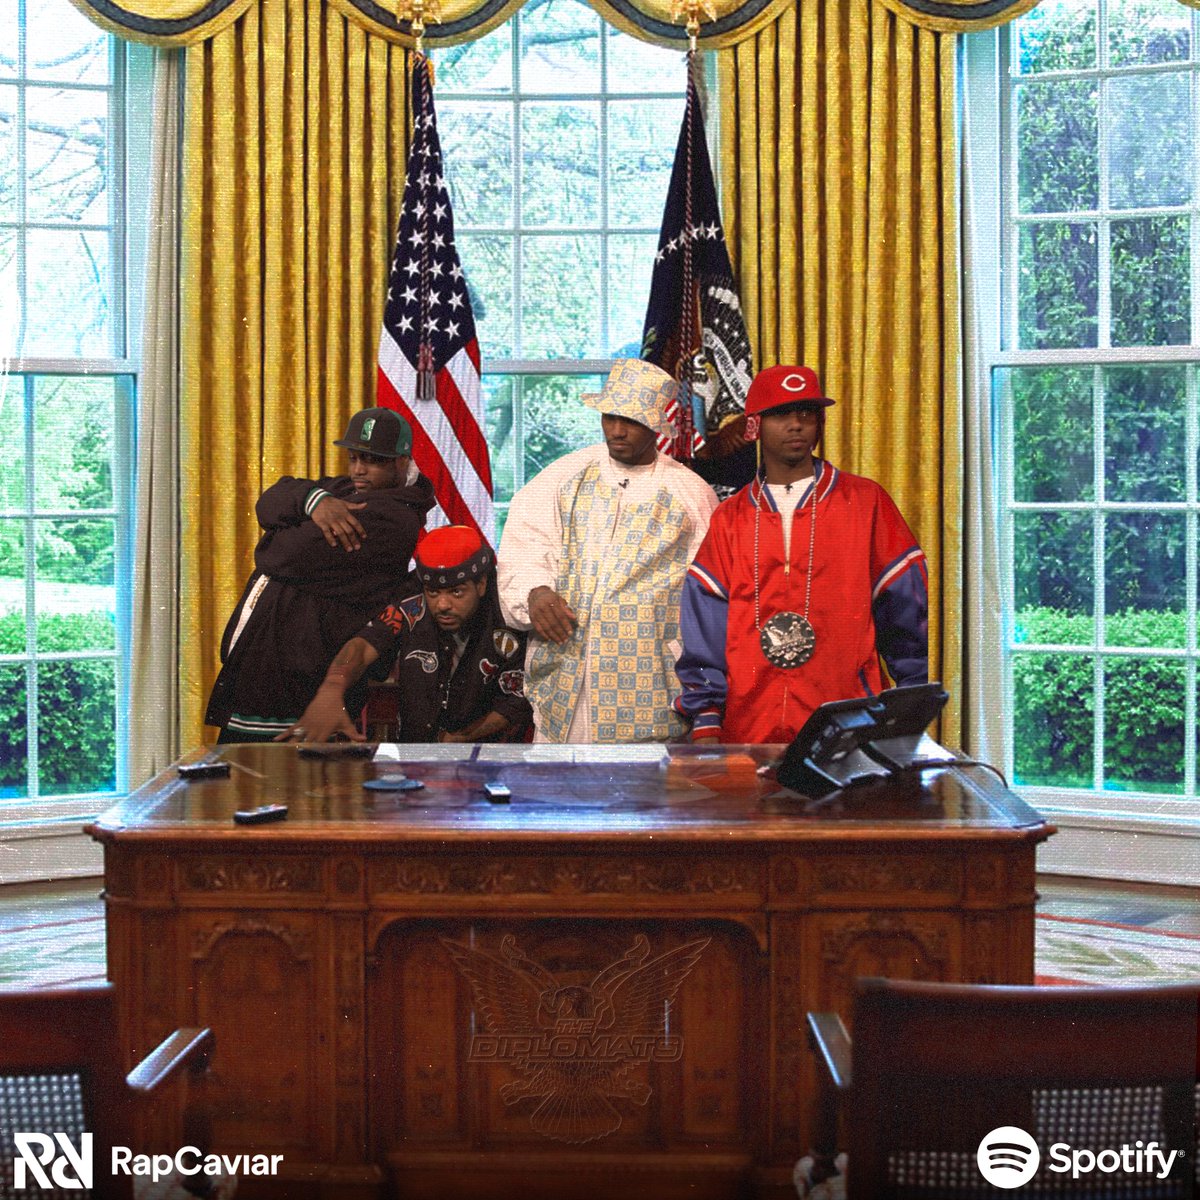 On the 20th anniversary of Diplomatic Immunity, we salute Dipset for their impact on the game. Nothing but respect for our presidents 🫡